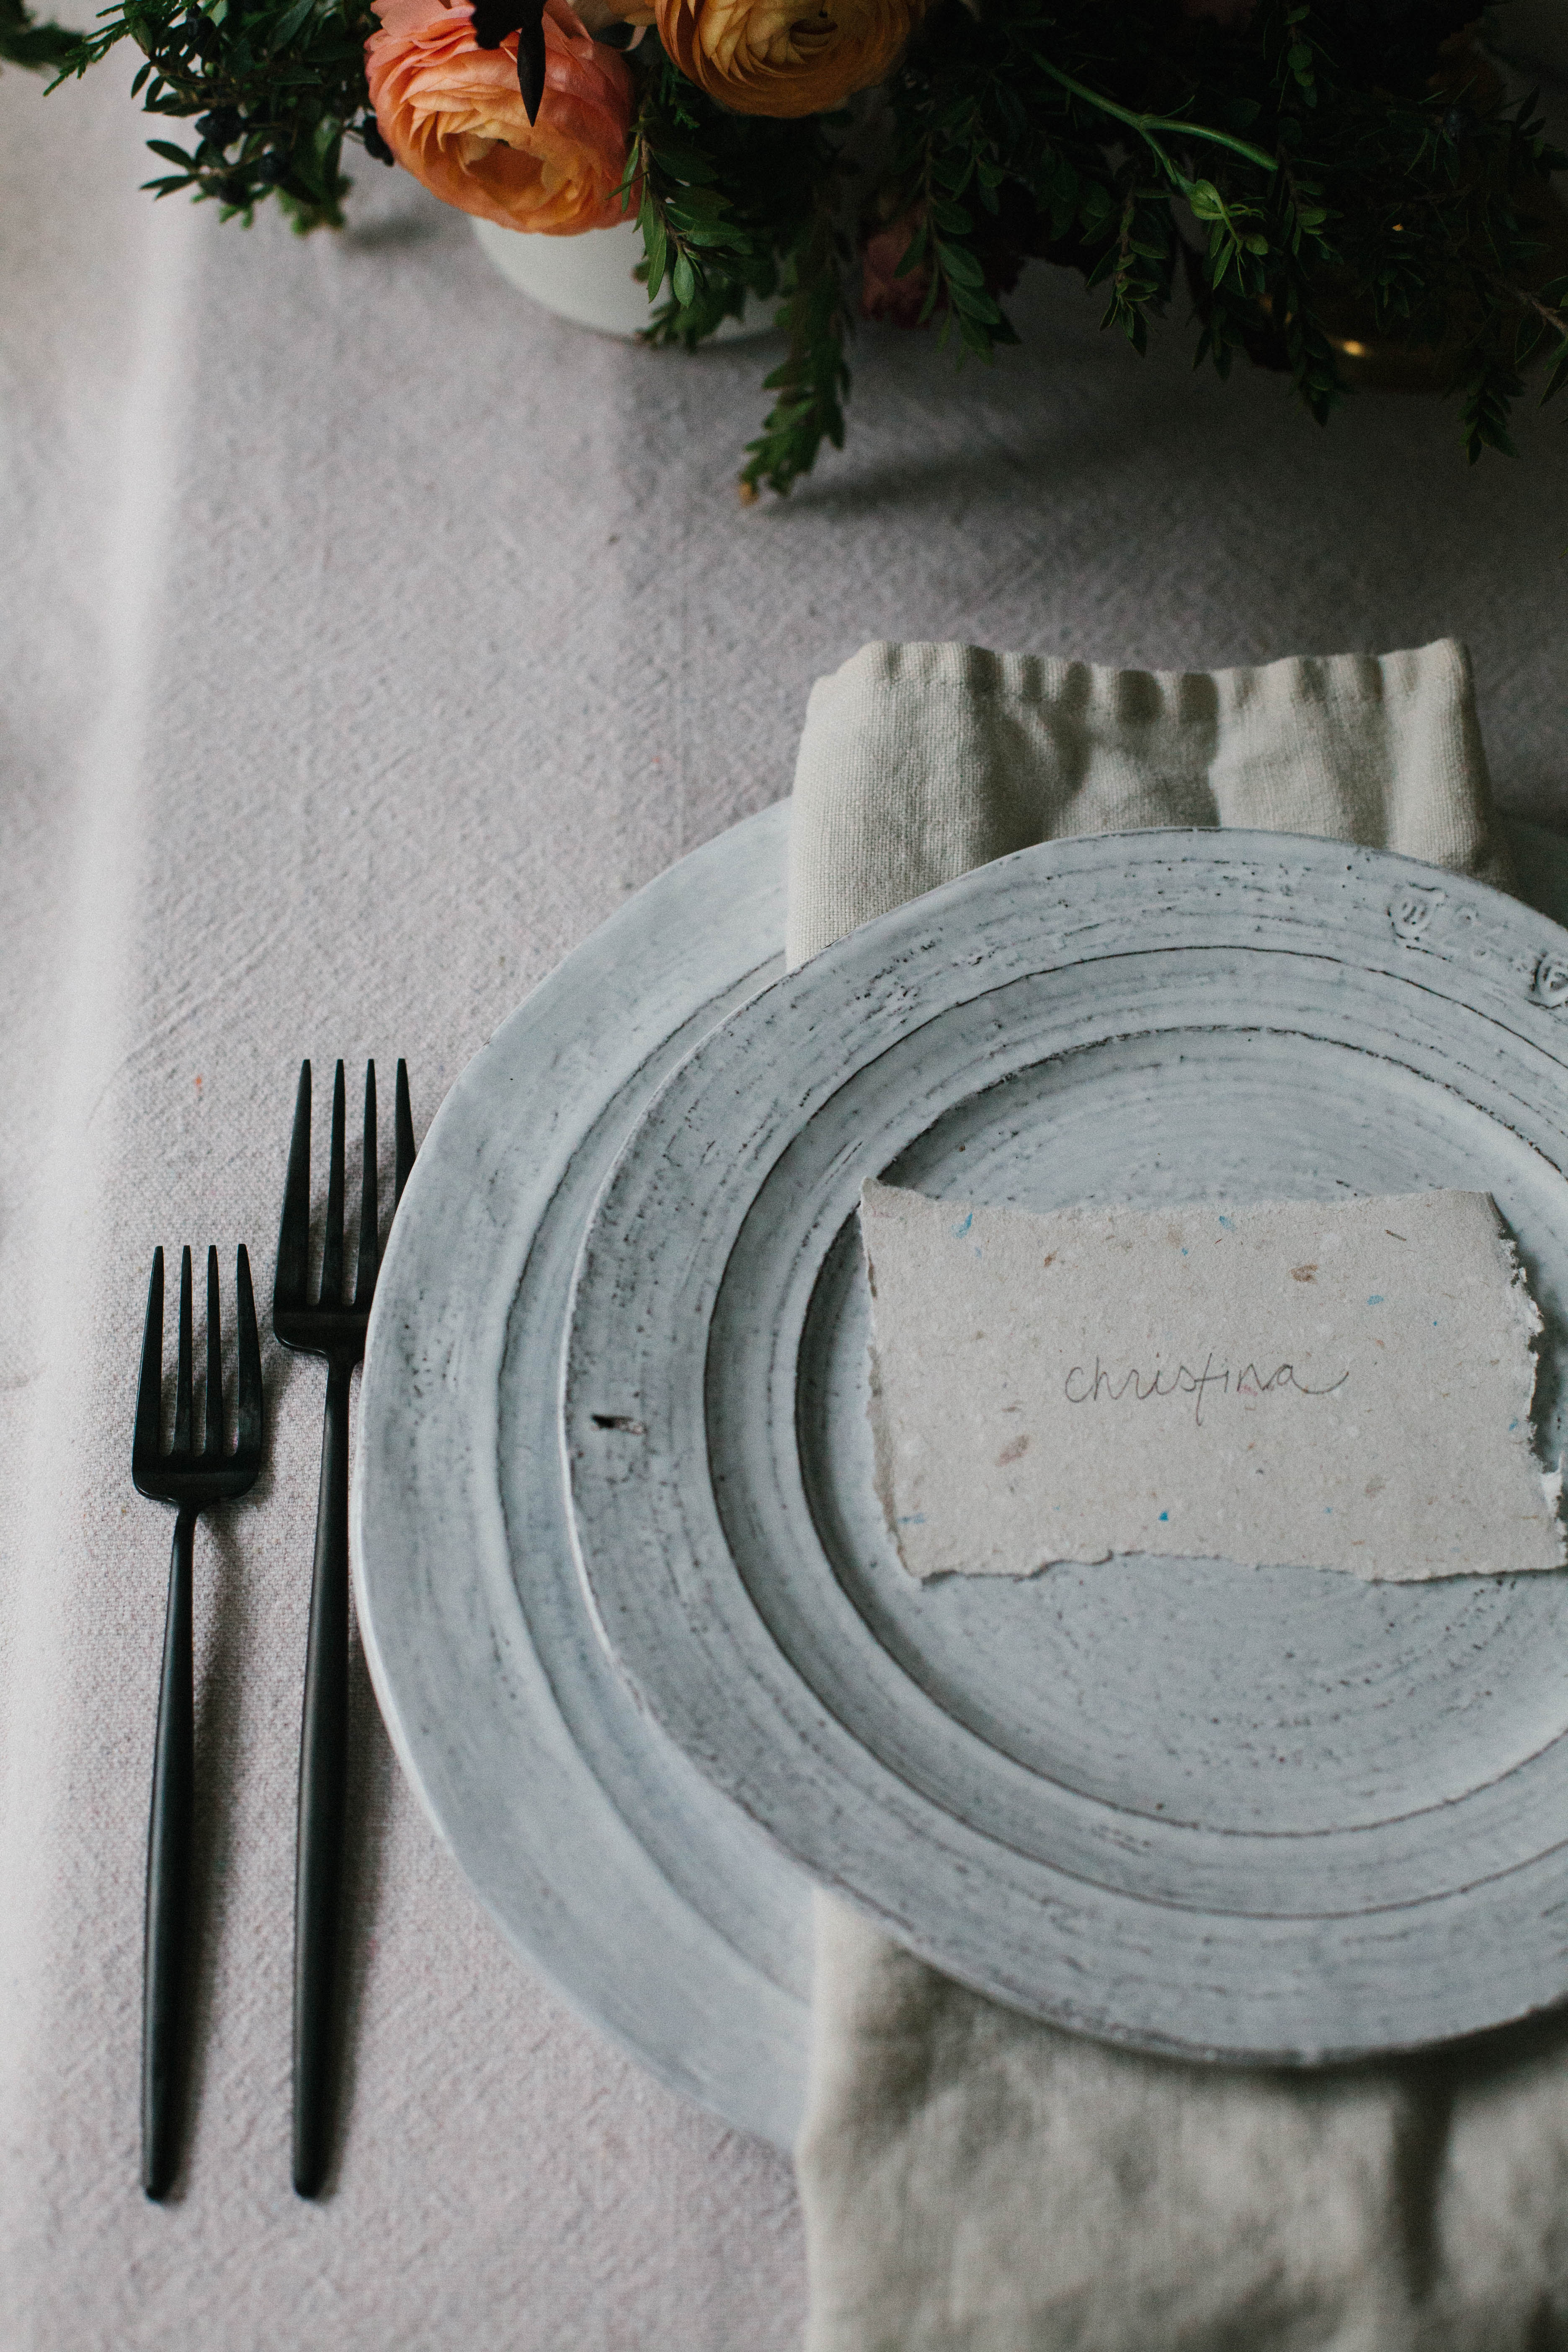 A Daily Something | Holiday Table Inspiration + Tips